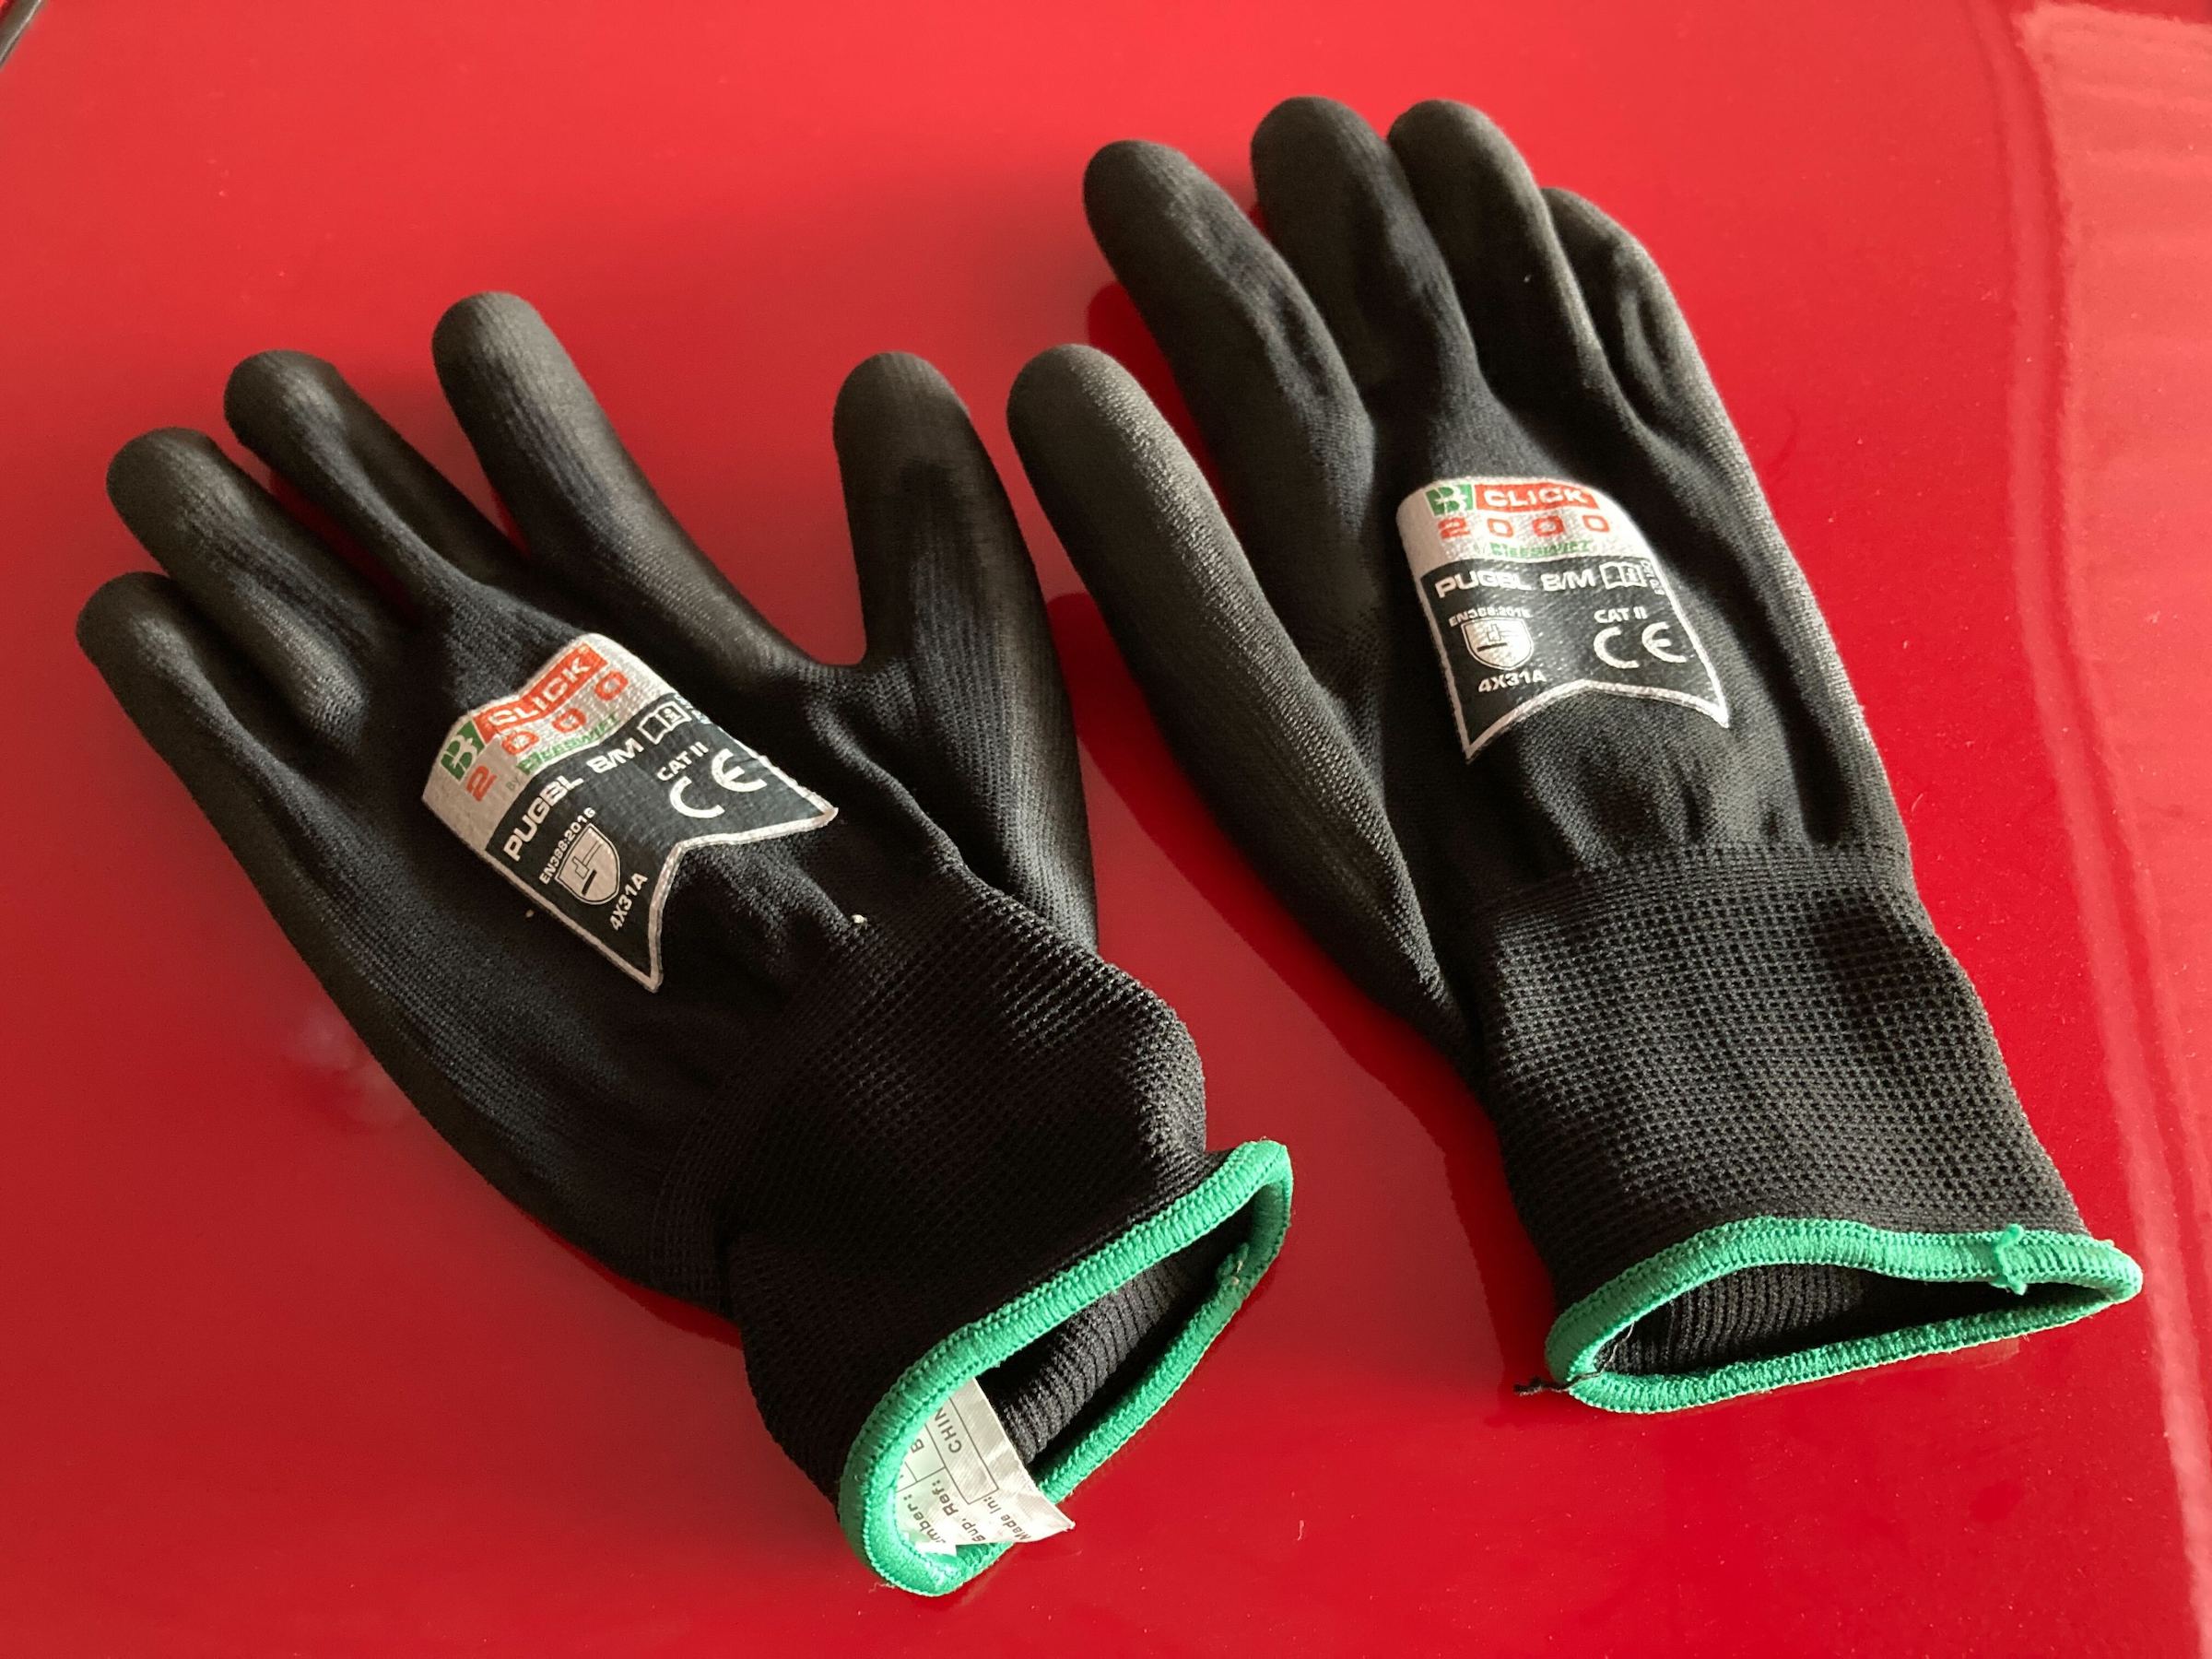 When it comes to protecting your hands, do your work gloves actually work?